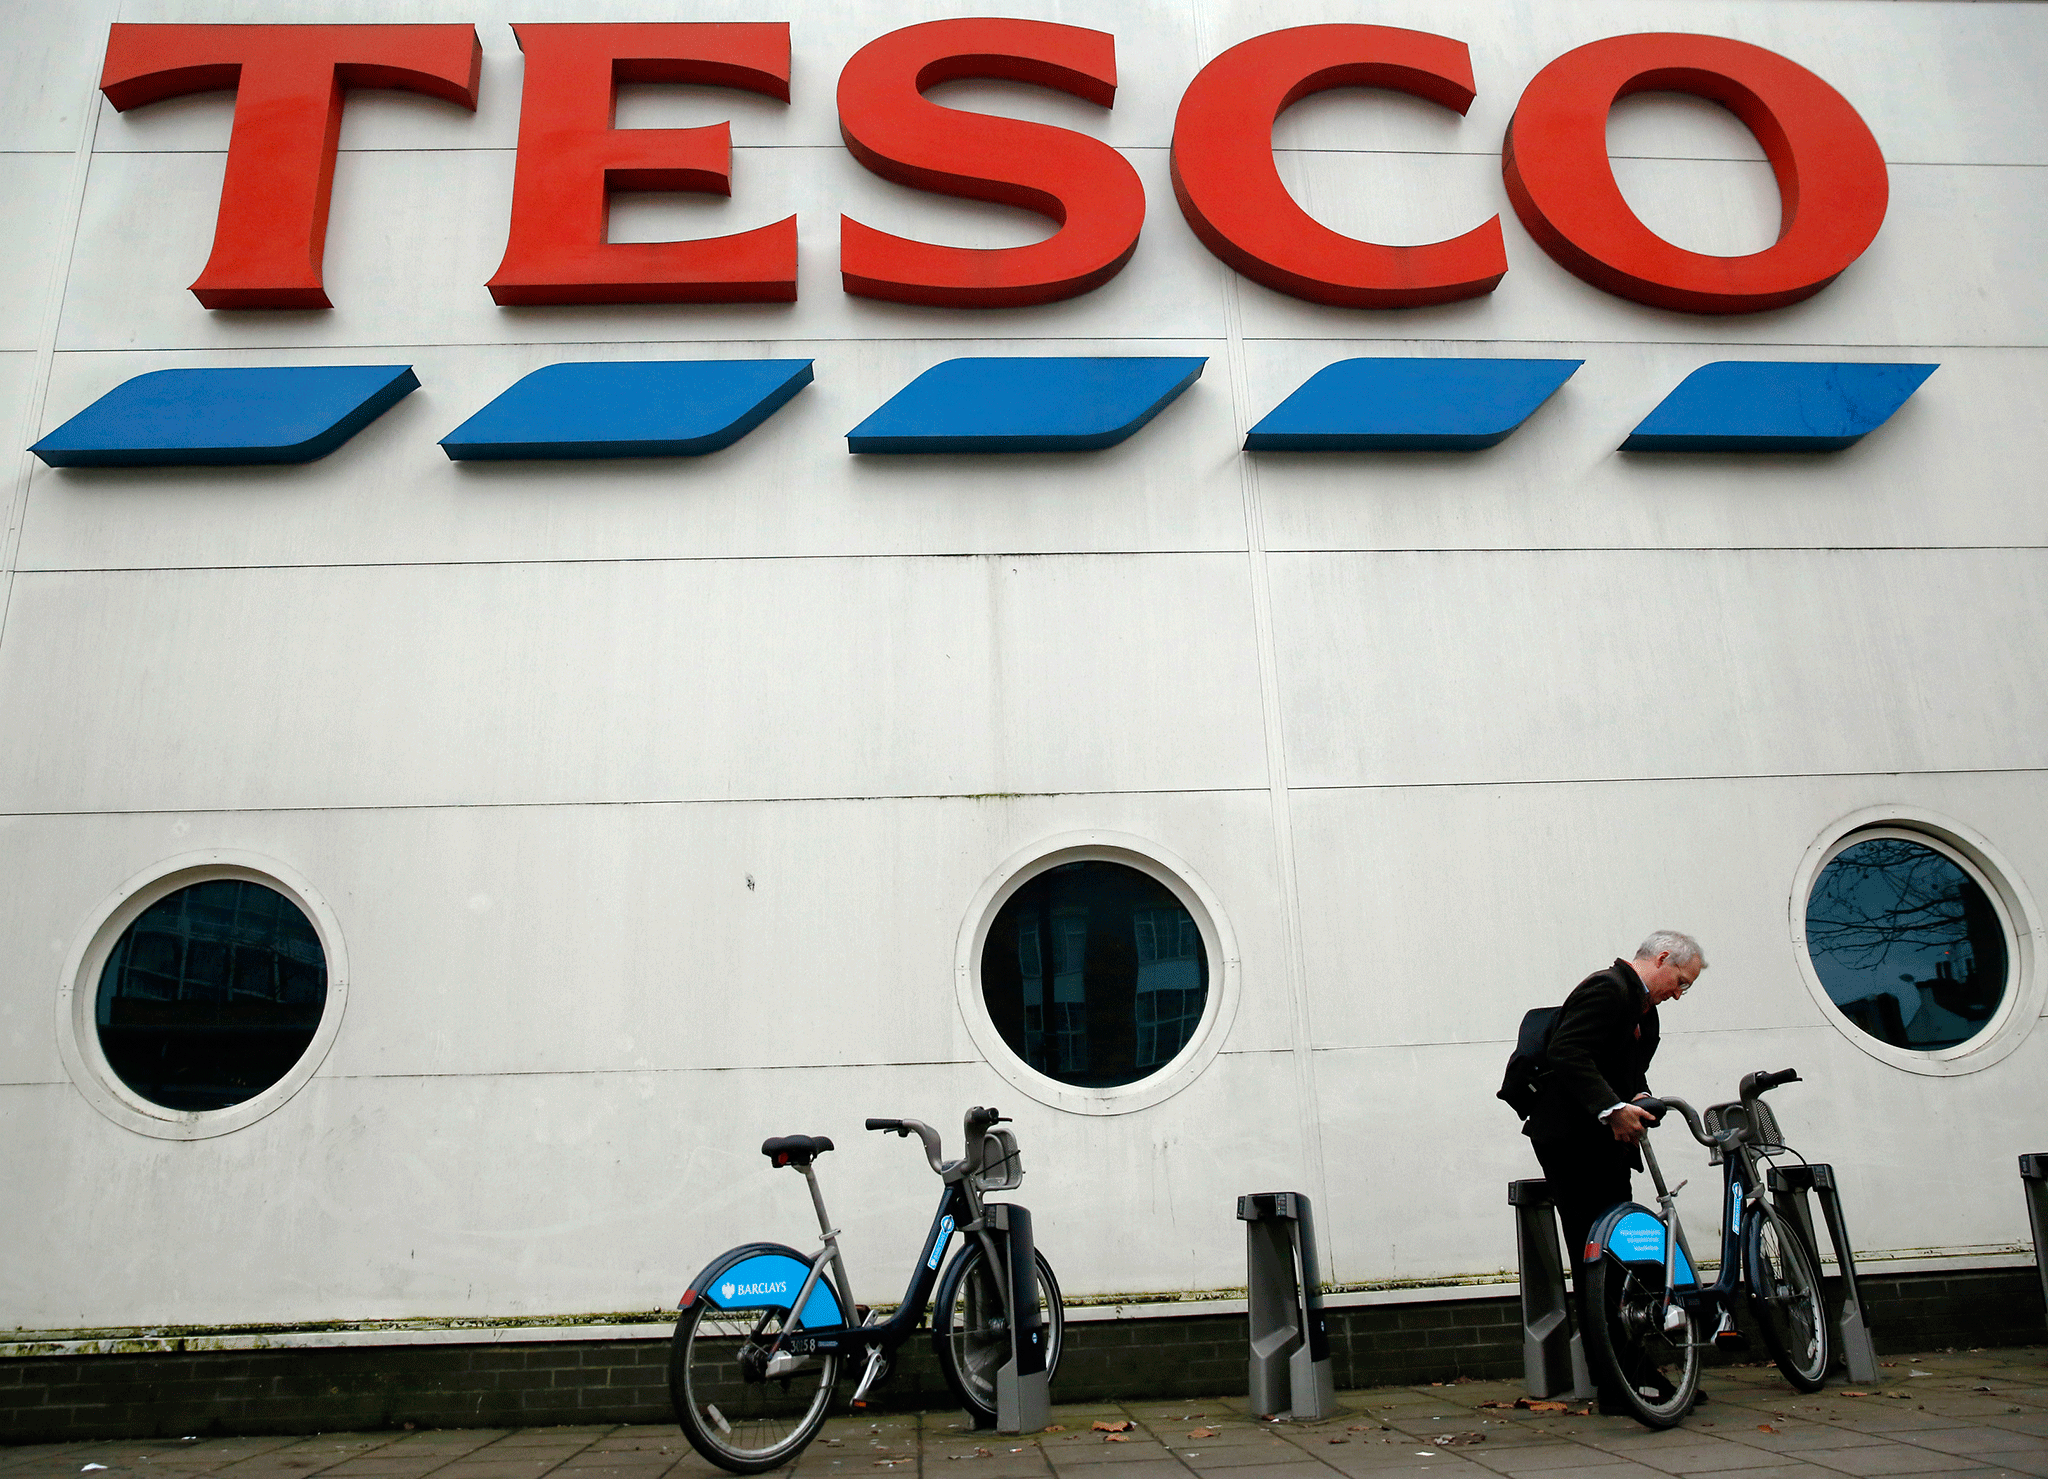 Tesco shares fall on report of new legal action over accounting botch